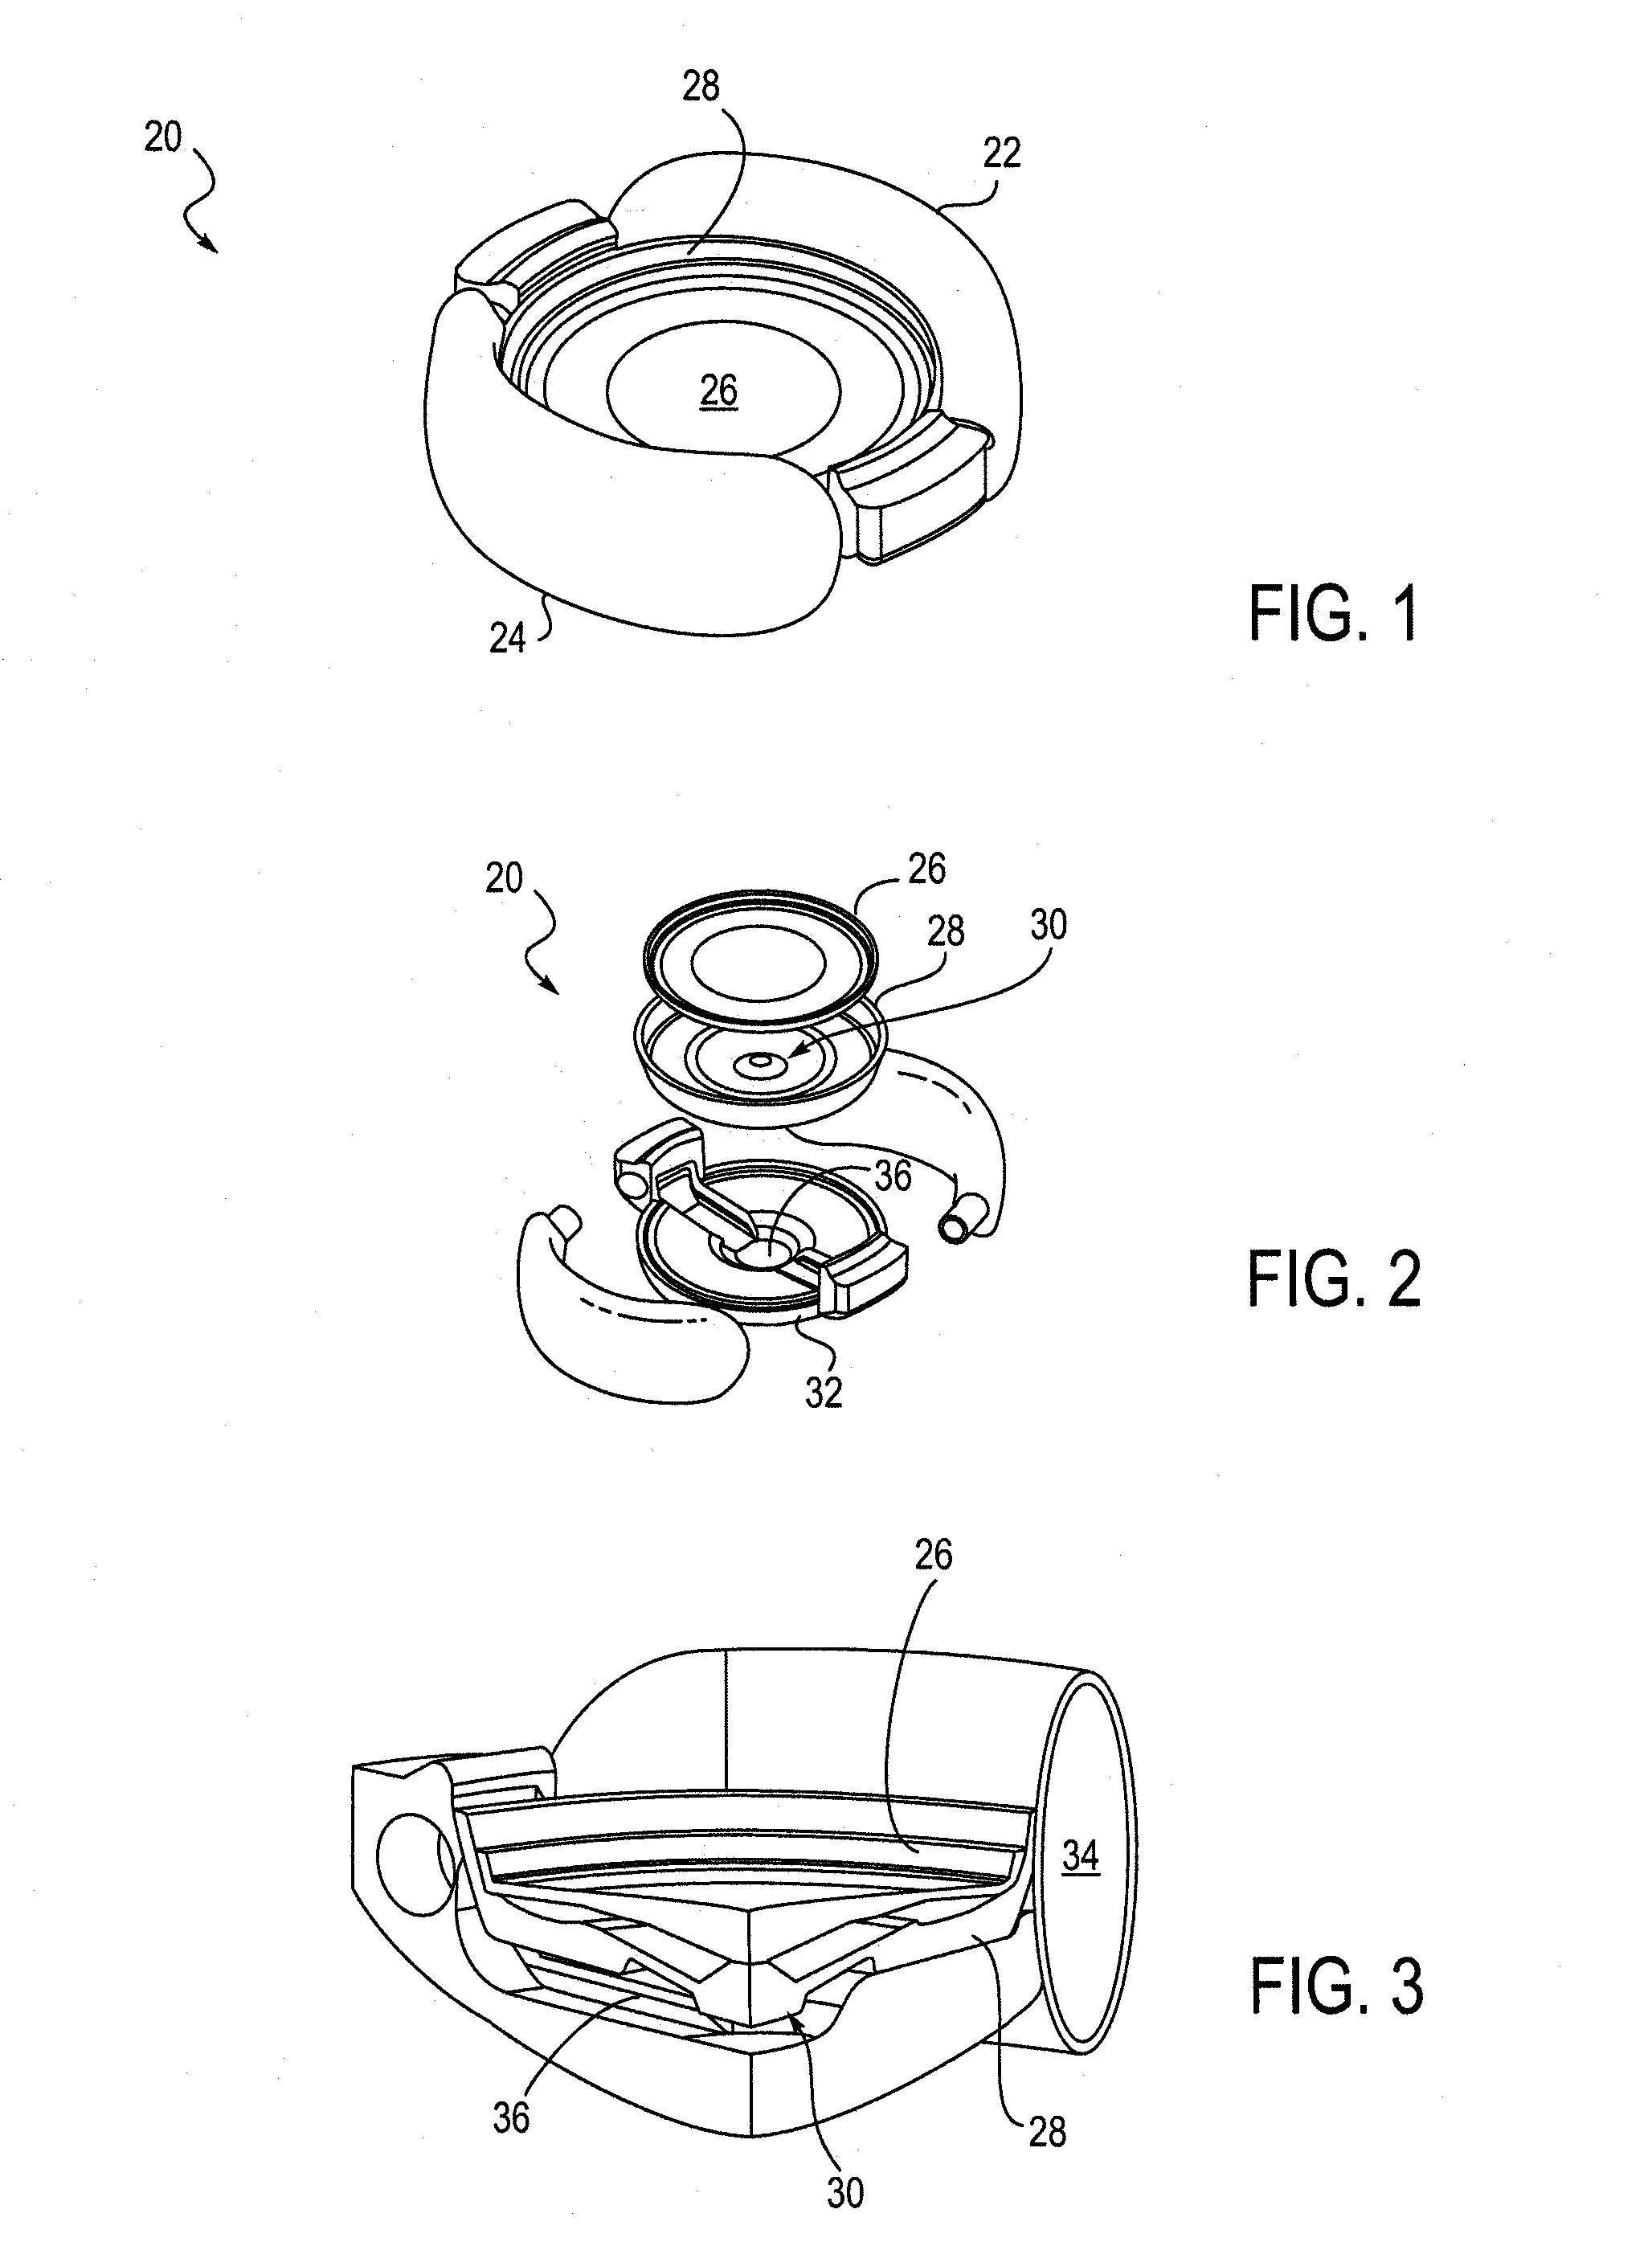 Lens Material and Methods of Curing with UV Light